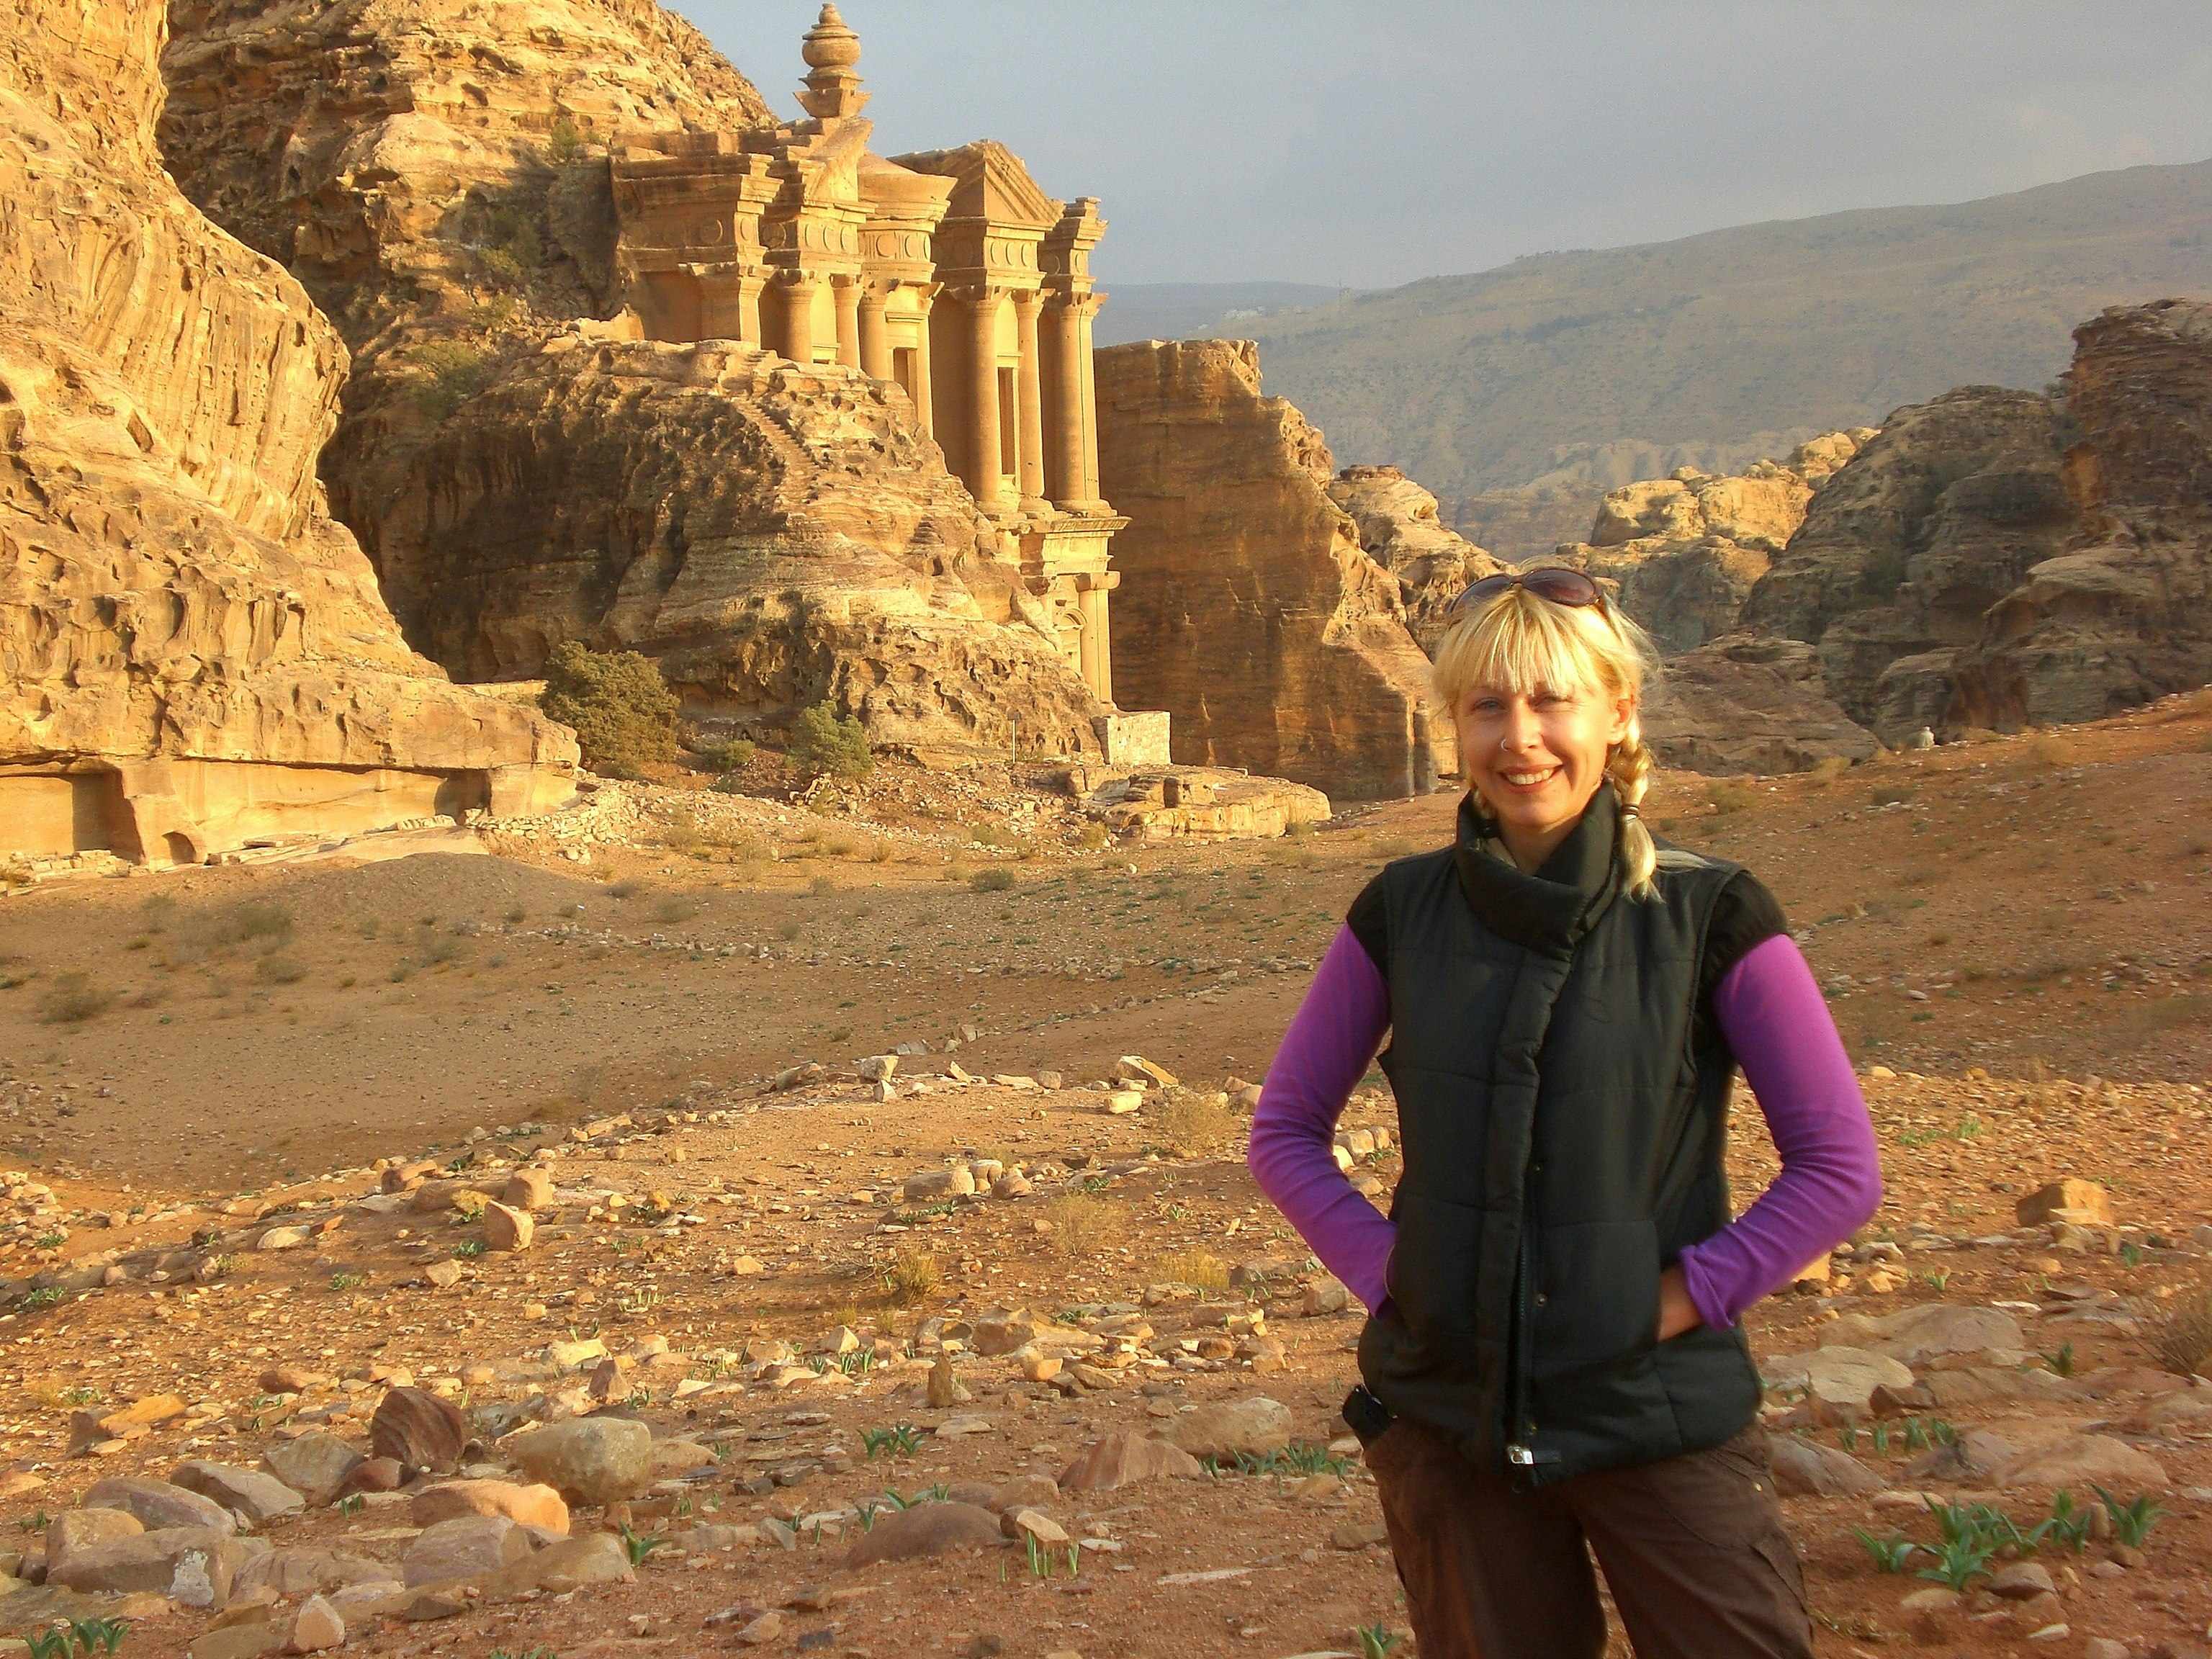 Jess poses for the camera with one of the elaborate, sandstone-carved facades of the ancient city of of Petra behind her.